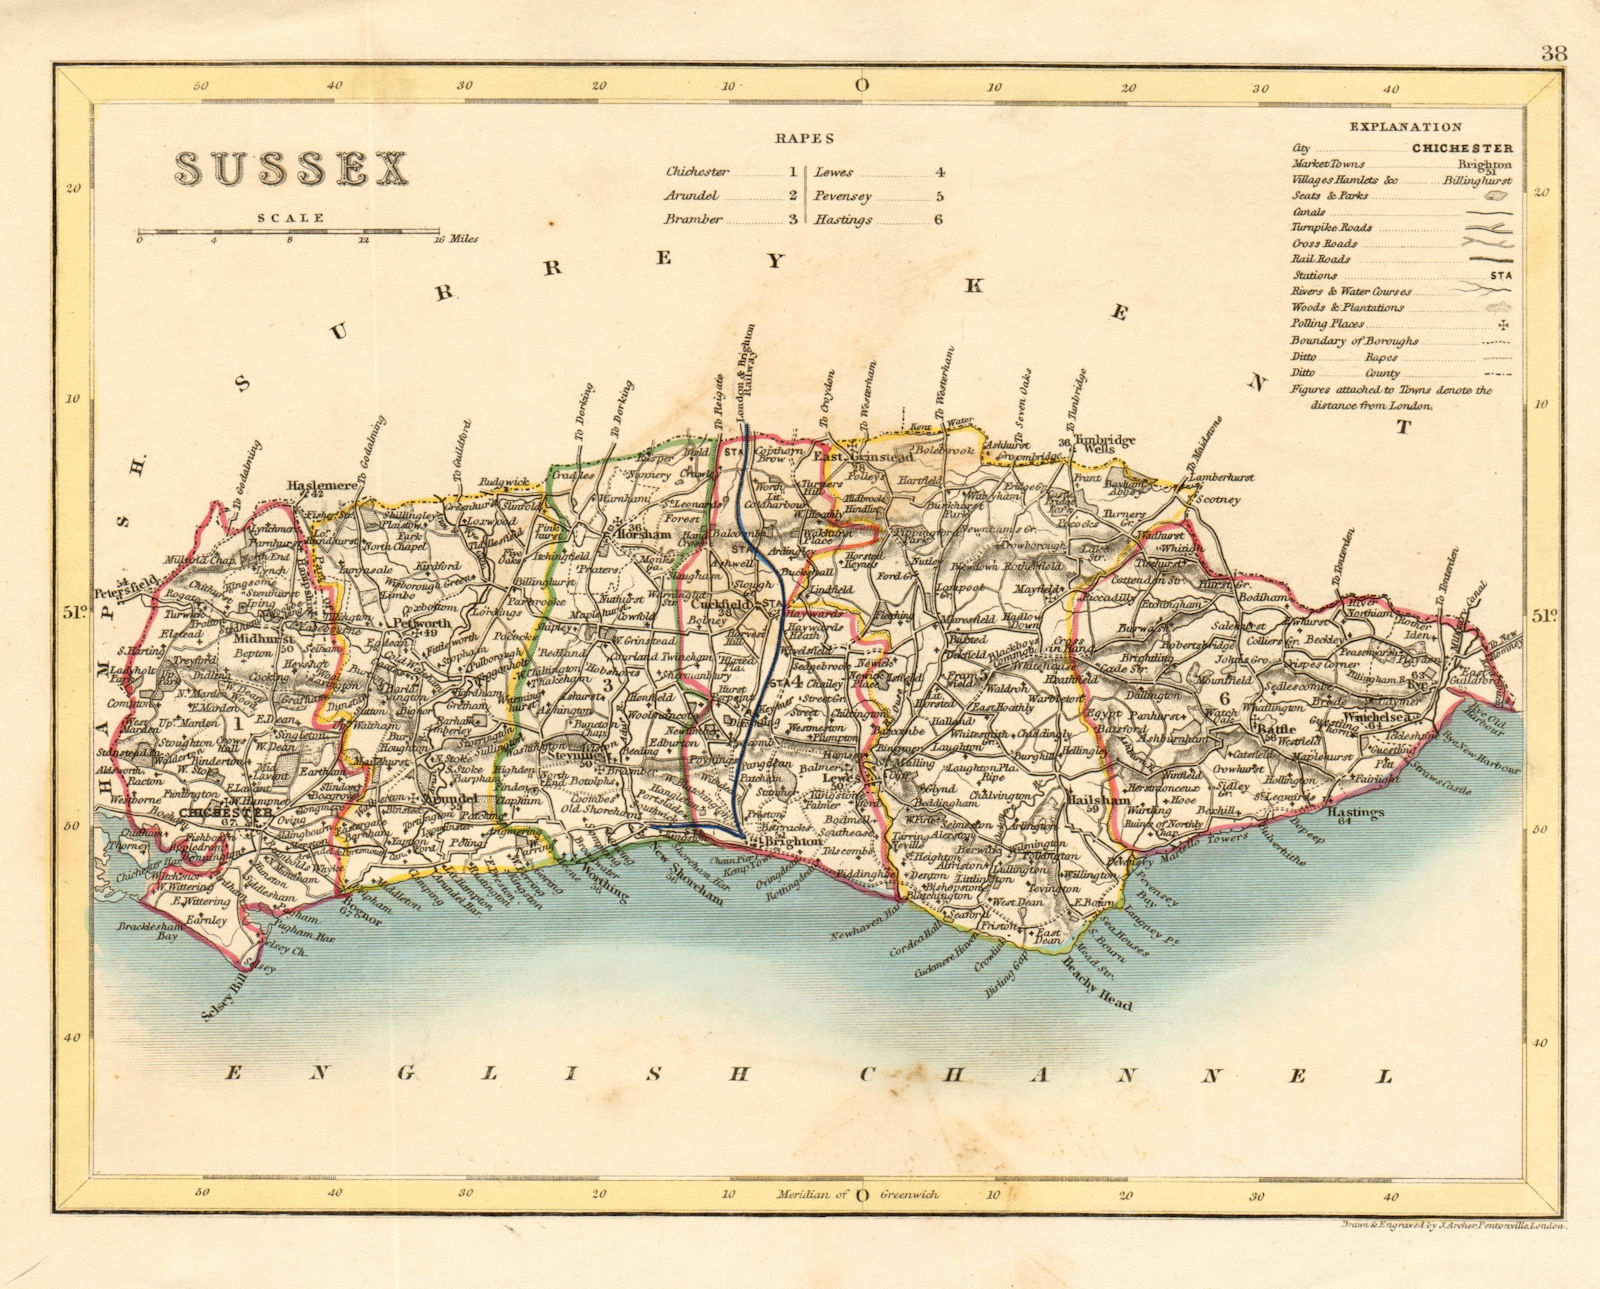 SUSSEX county map by ARCHER & DUGDALE. Canals polling places seats c1845